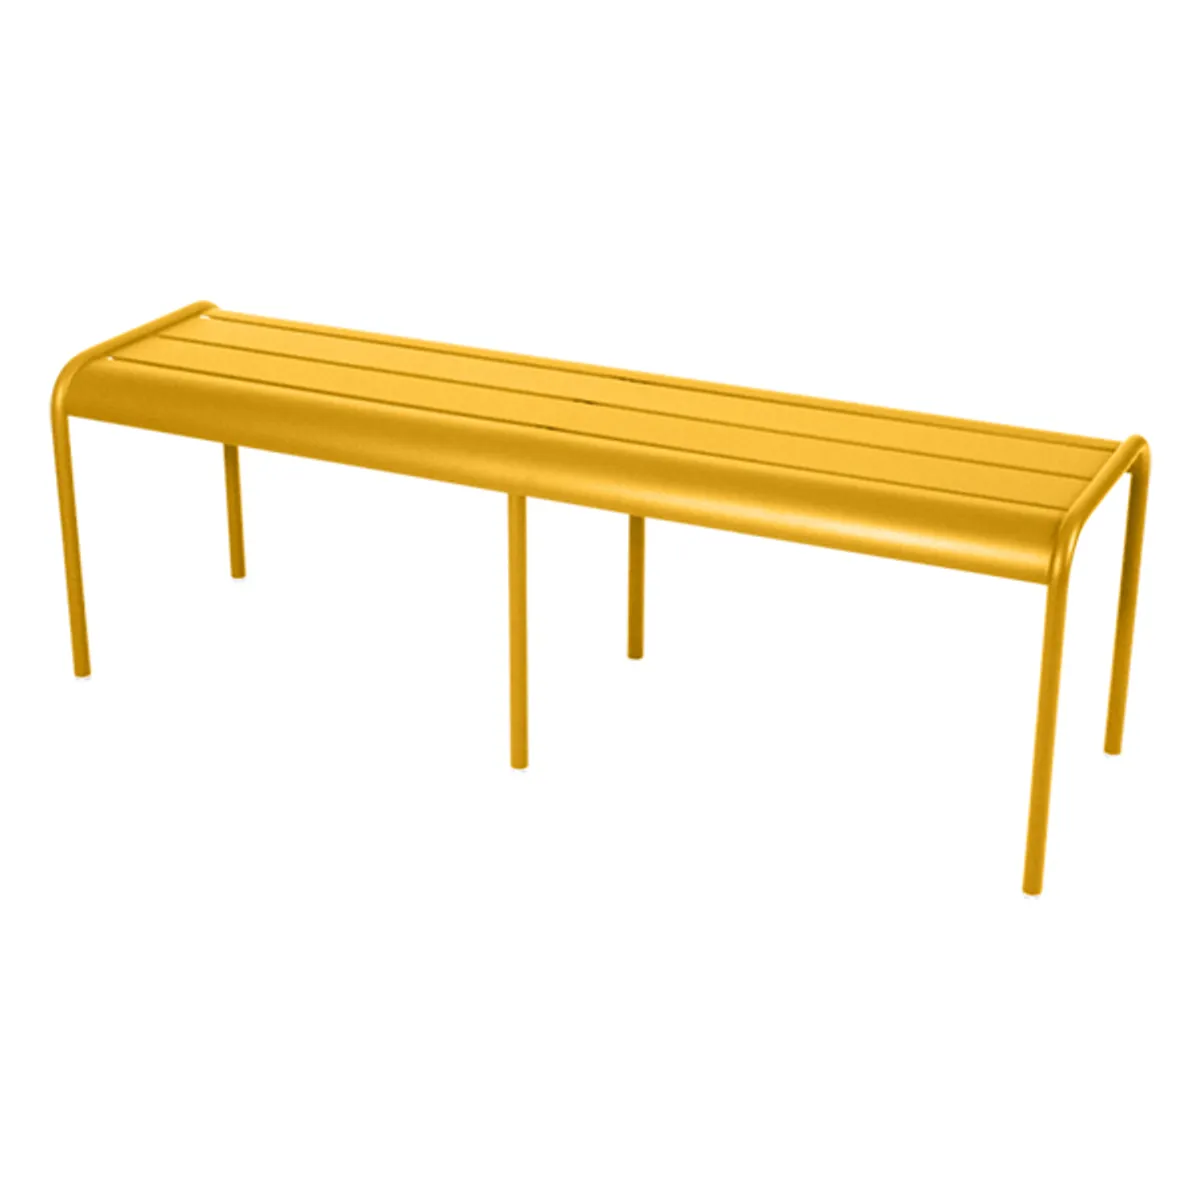 Luxembourg Bench For Outdoor Use Honey